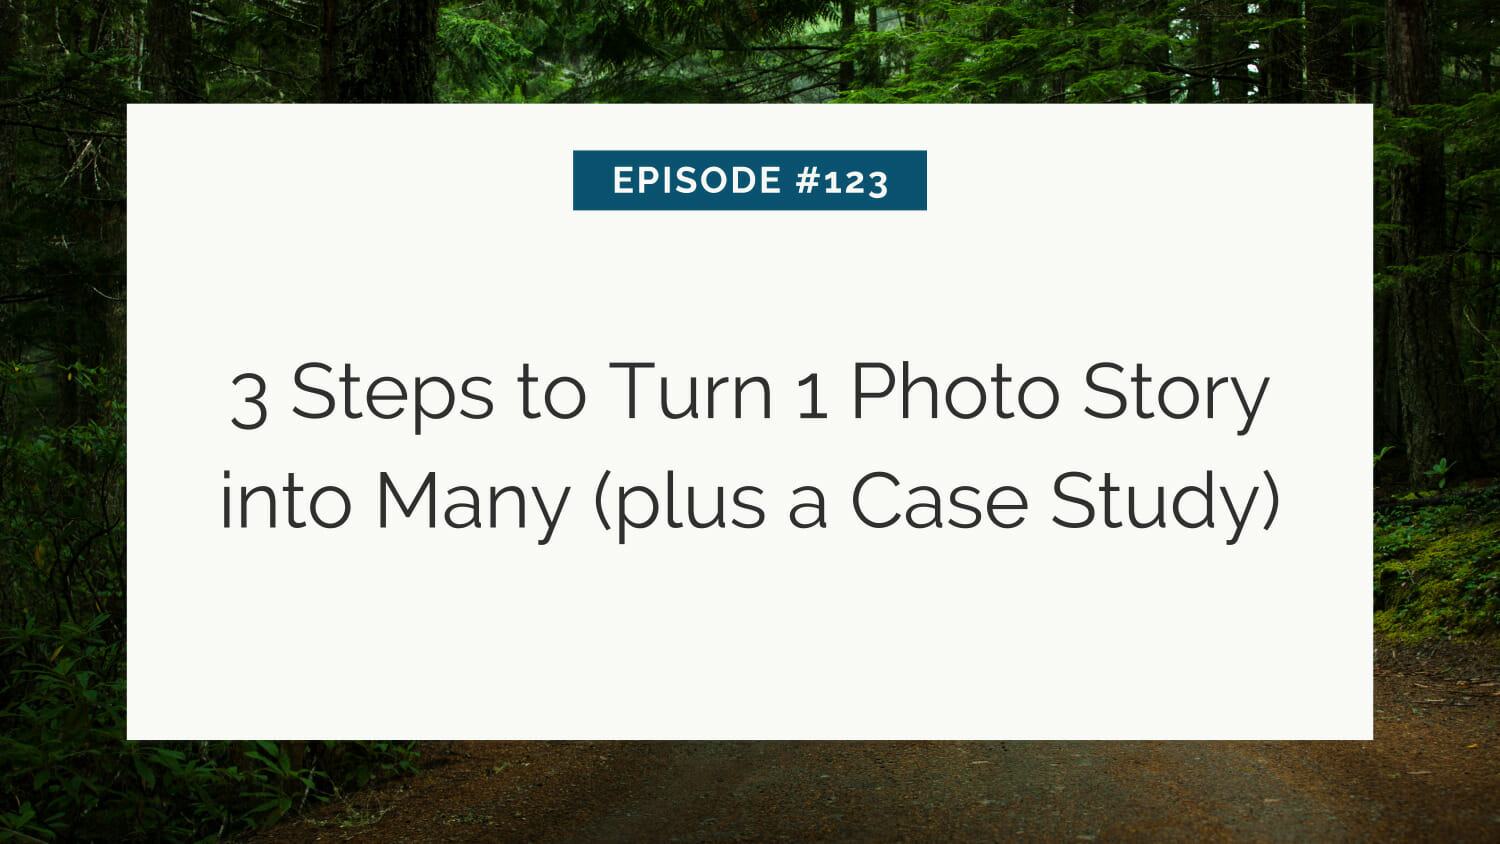 Podcast title slide for episode #123 discussing "3 steps to turn 1 photo story into many", featuring a forest background.